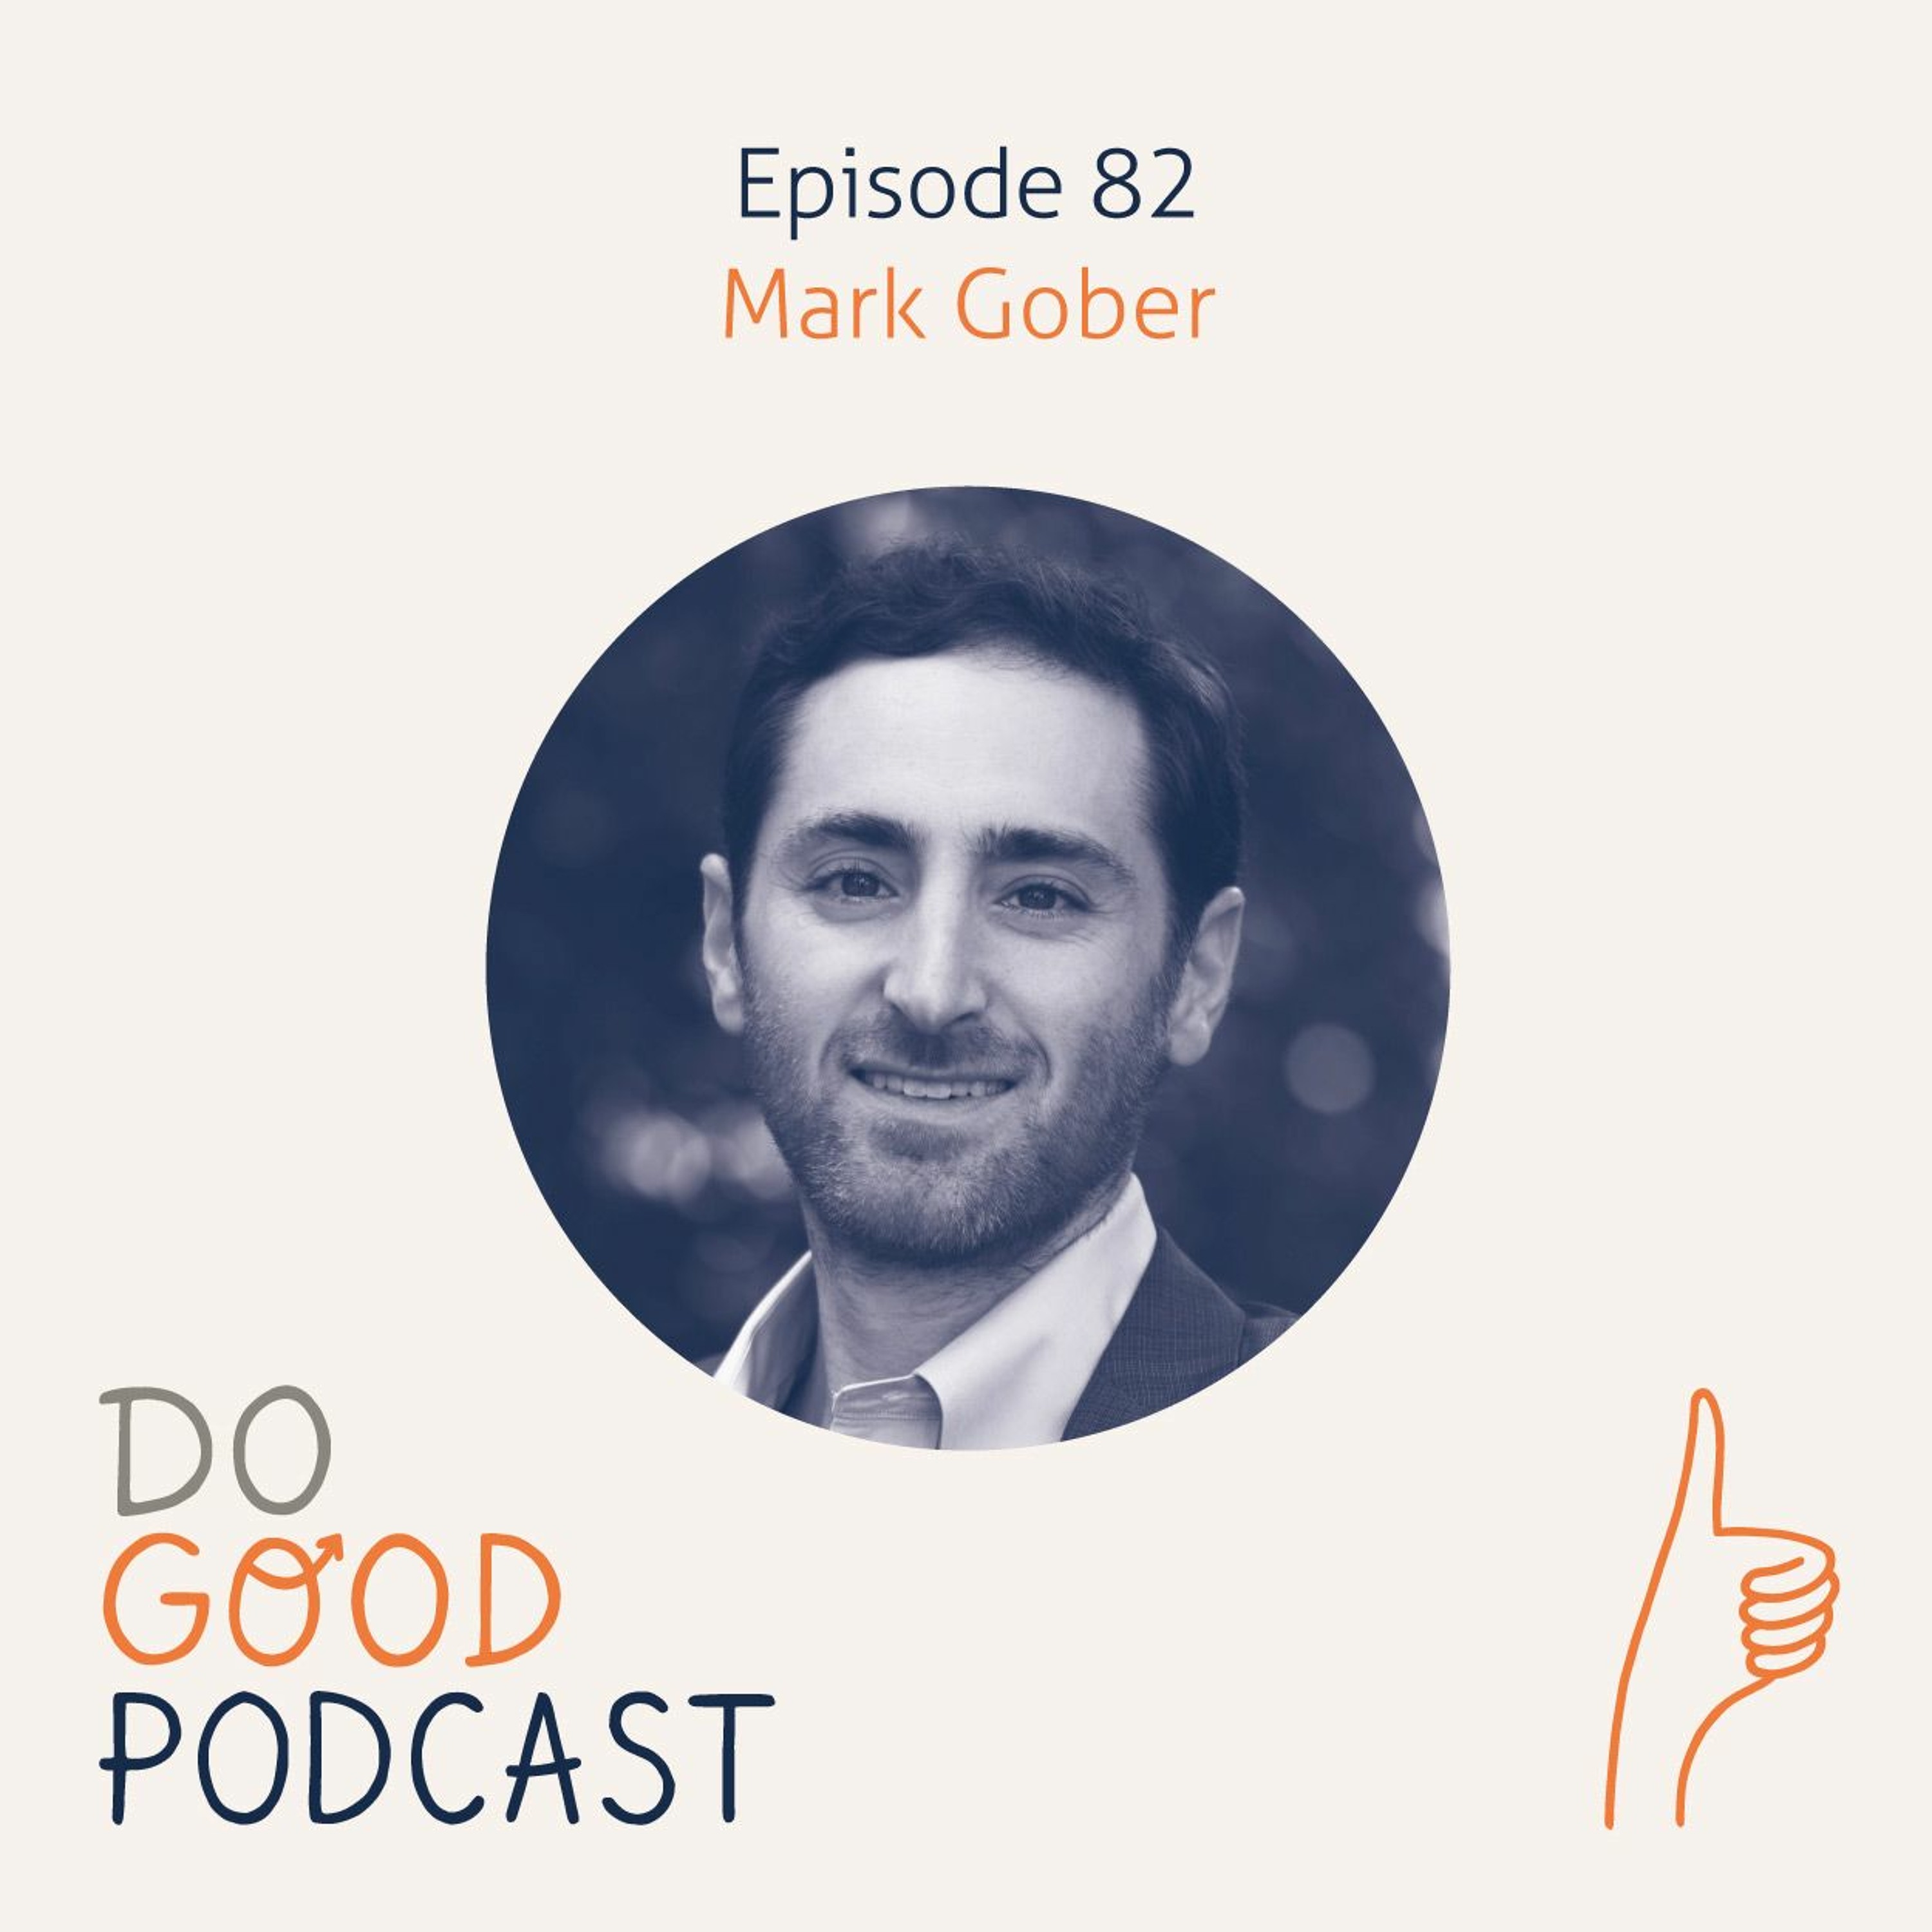 Ep 82: Mark Gober on developing a new mindset to explore life’s challenging questions